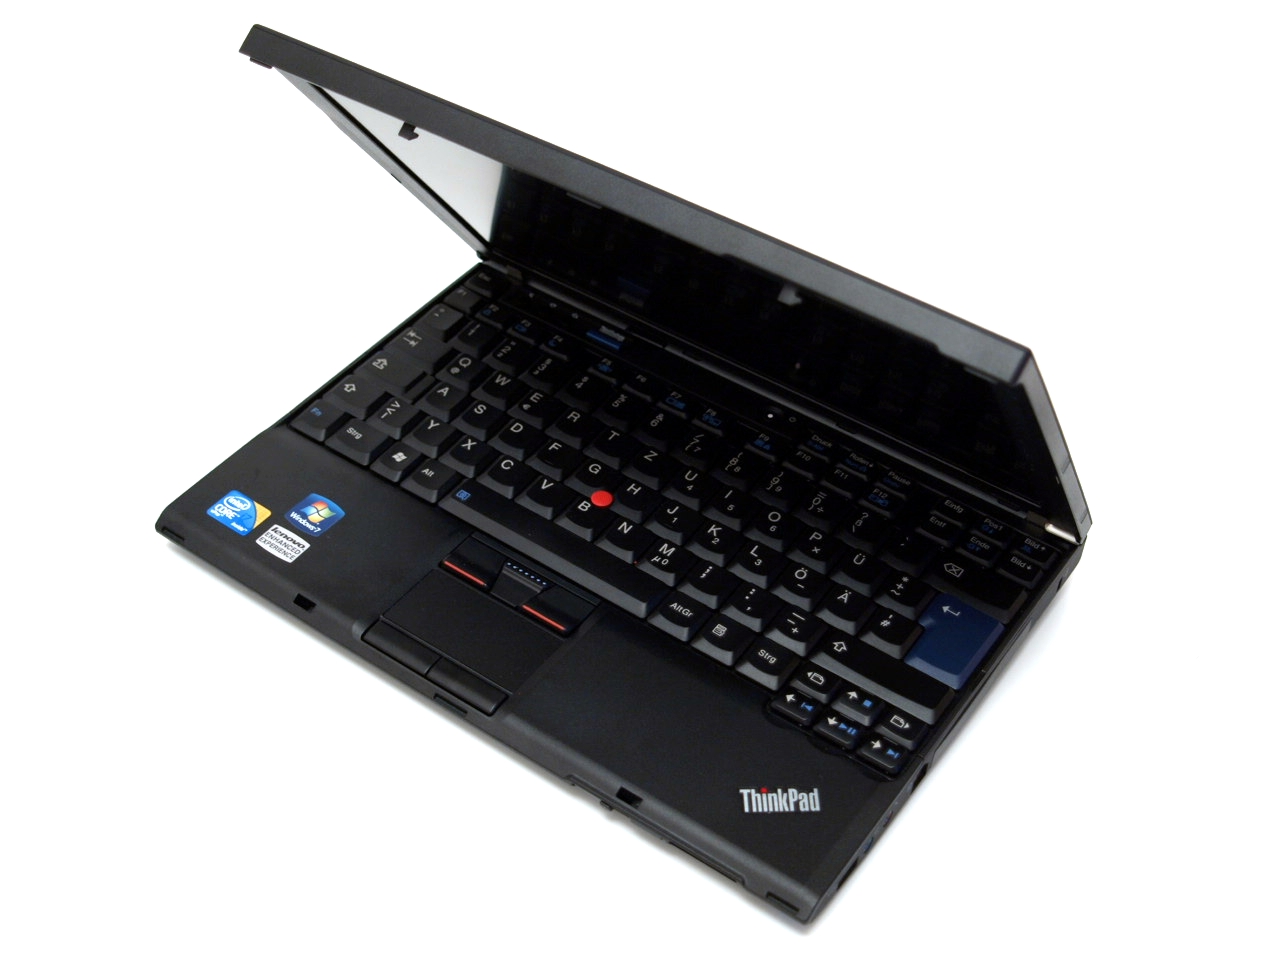 Lenovo thinkpad x201 drivers for windows 7 64 bit givenchy pour homme red